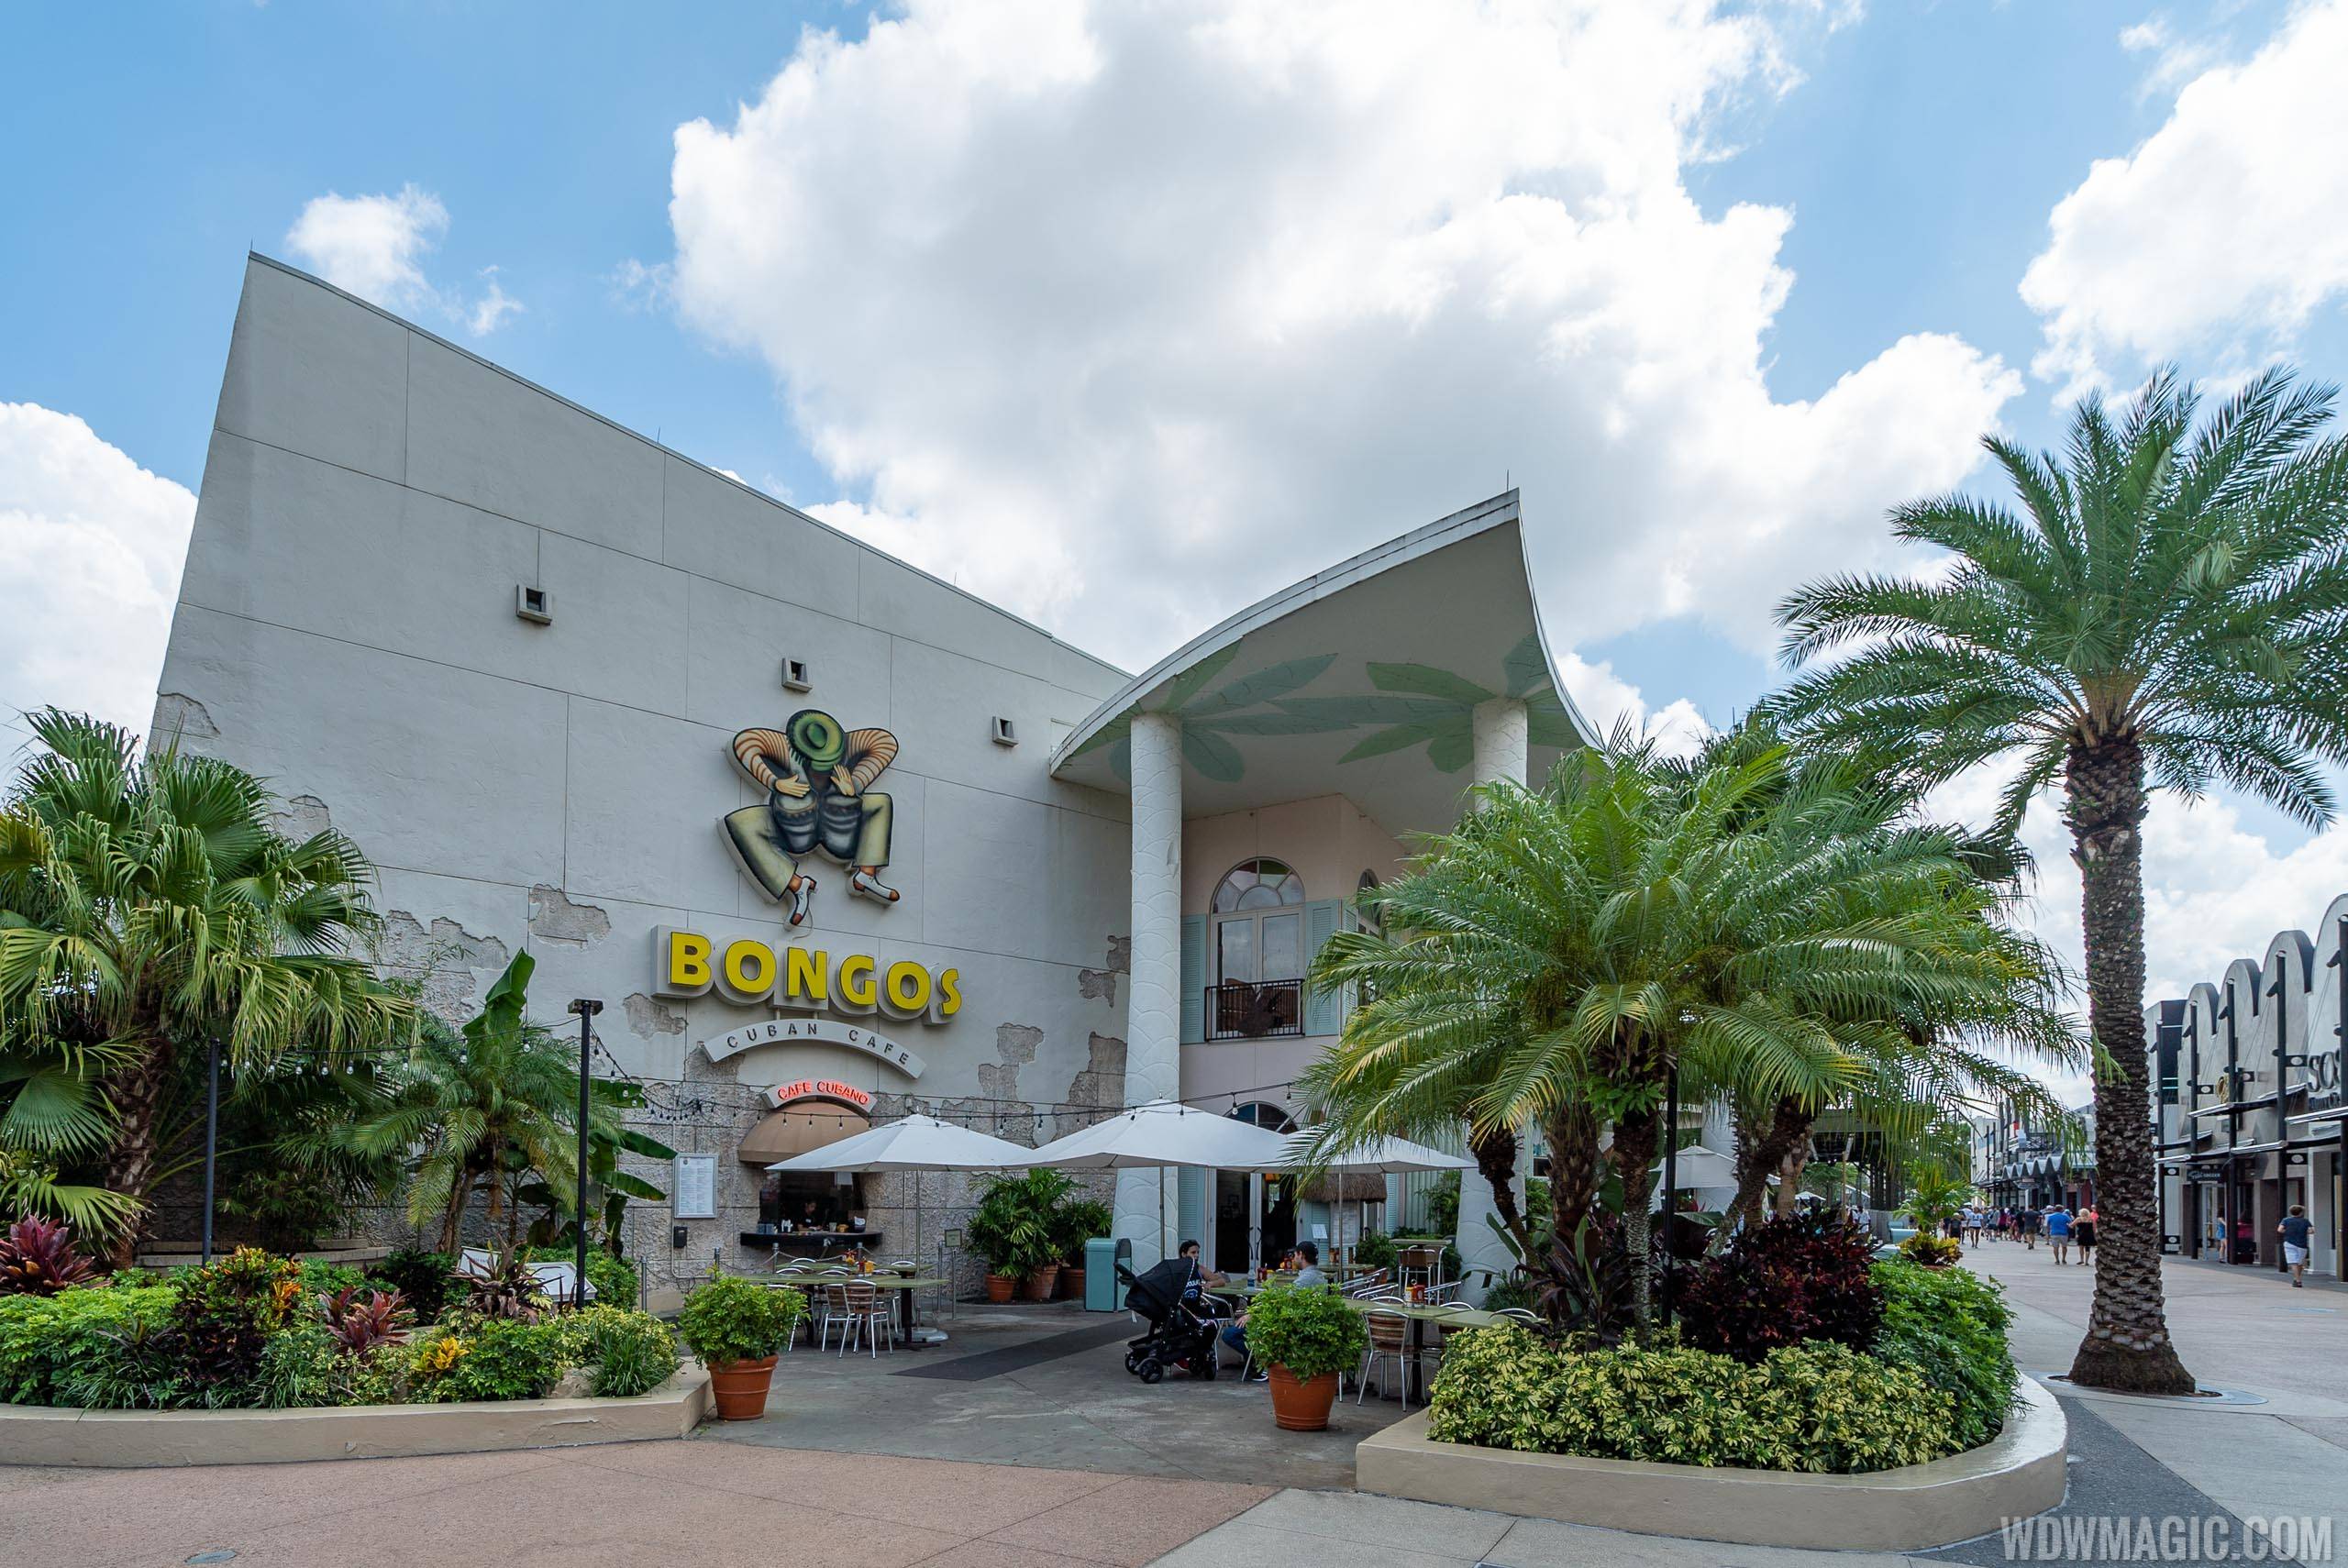 Bongo's to permanently close at Disney Springs on August 18